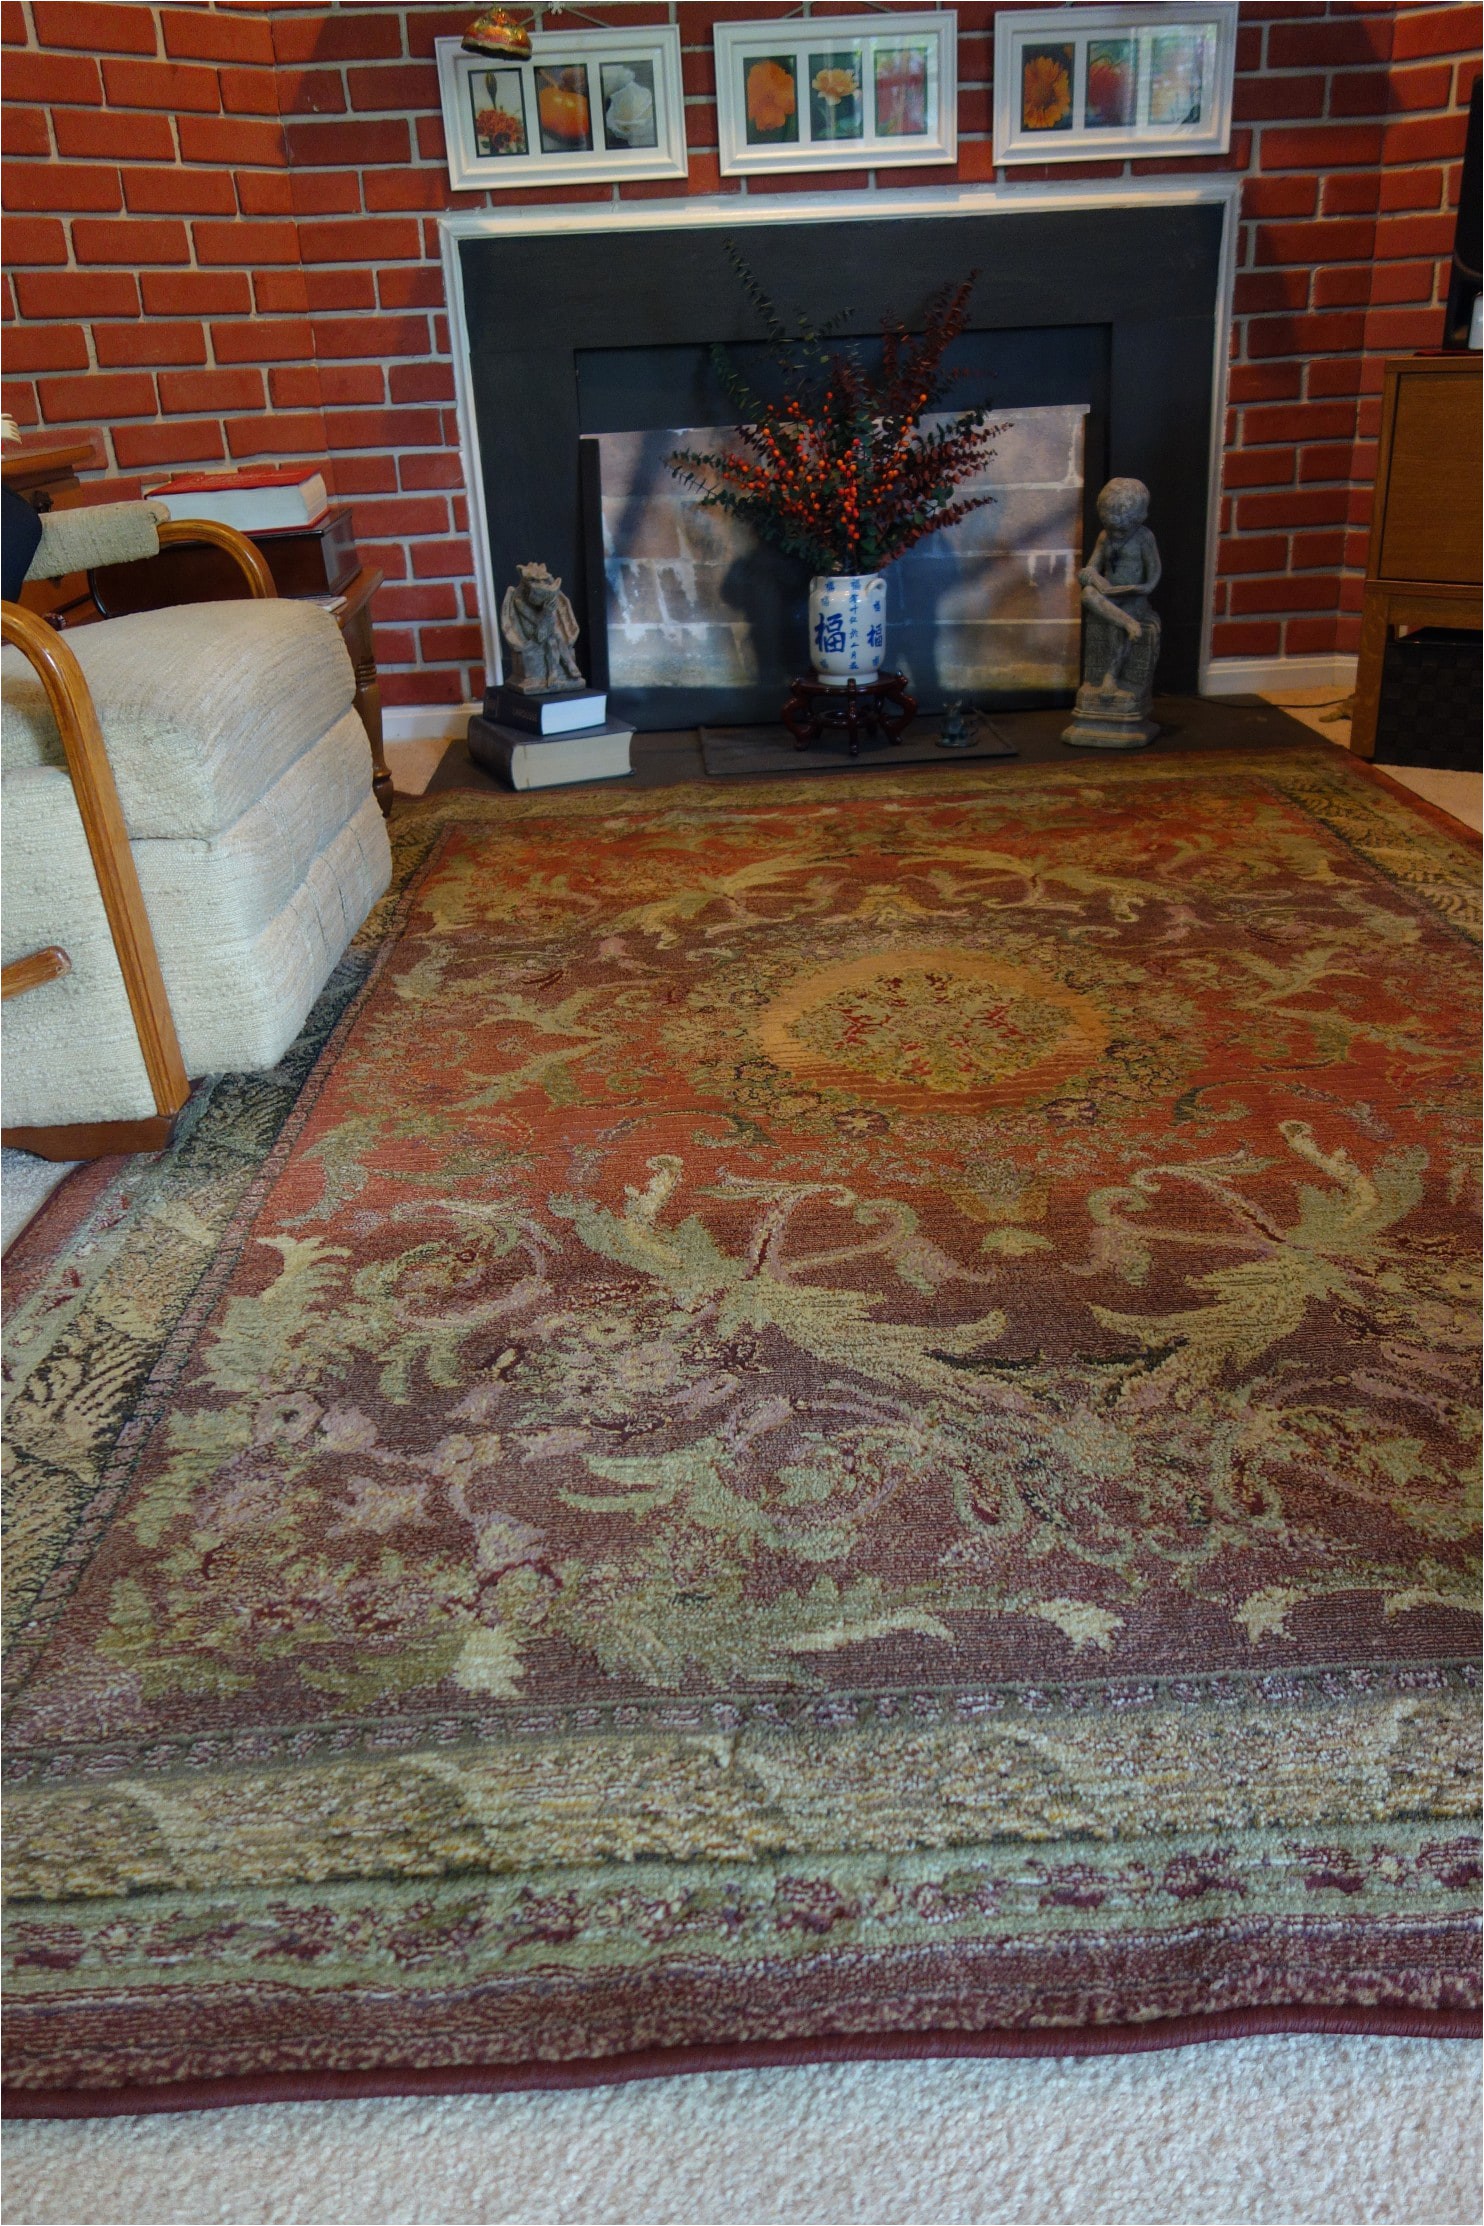 Stop area Rug From Moving On Carpet How to Keep An area Rug From Creeping On A Carpeted Floor